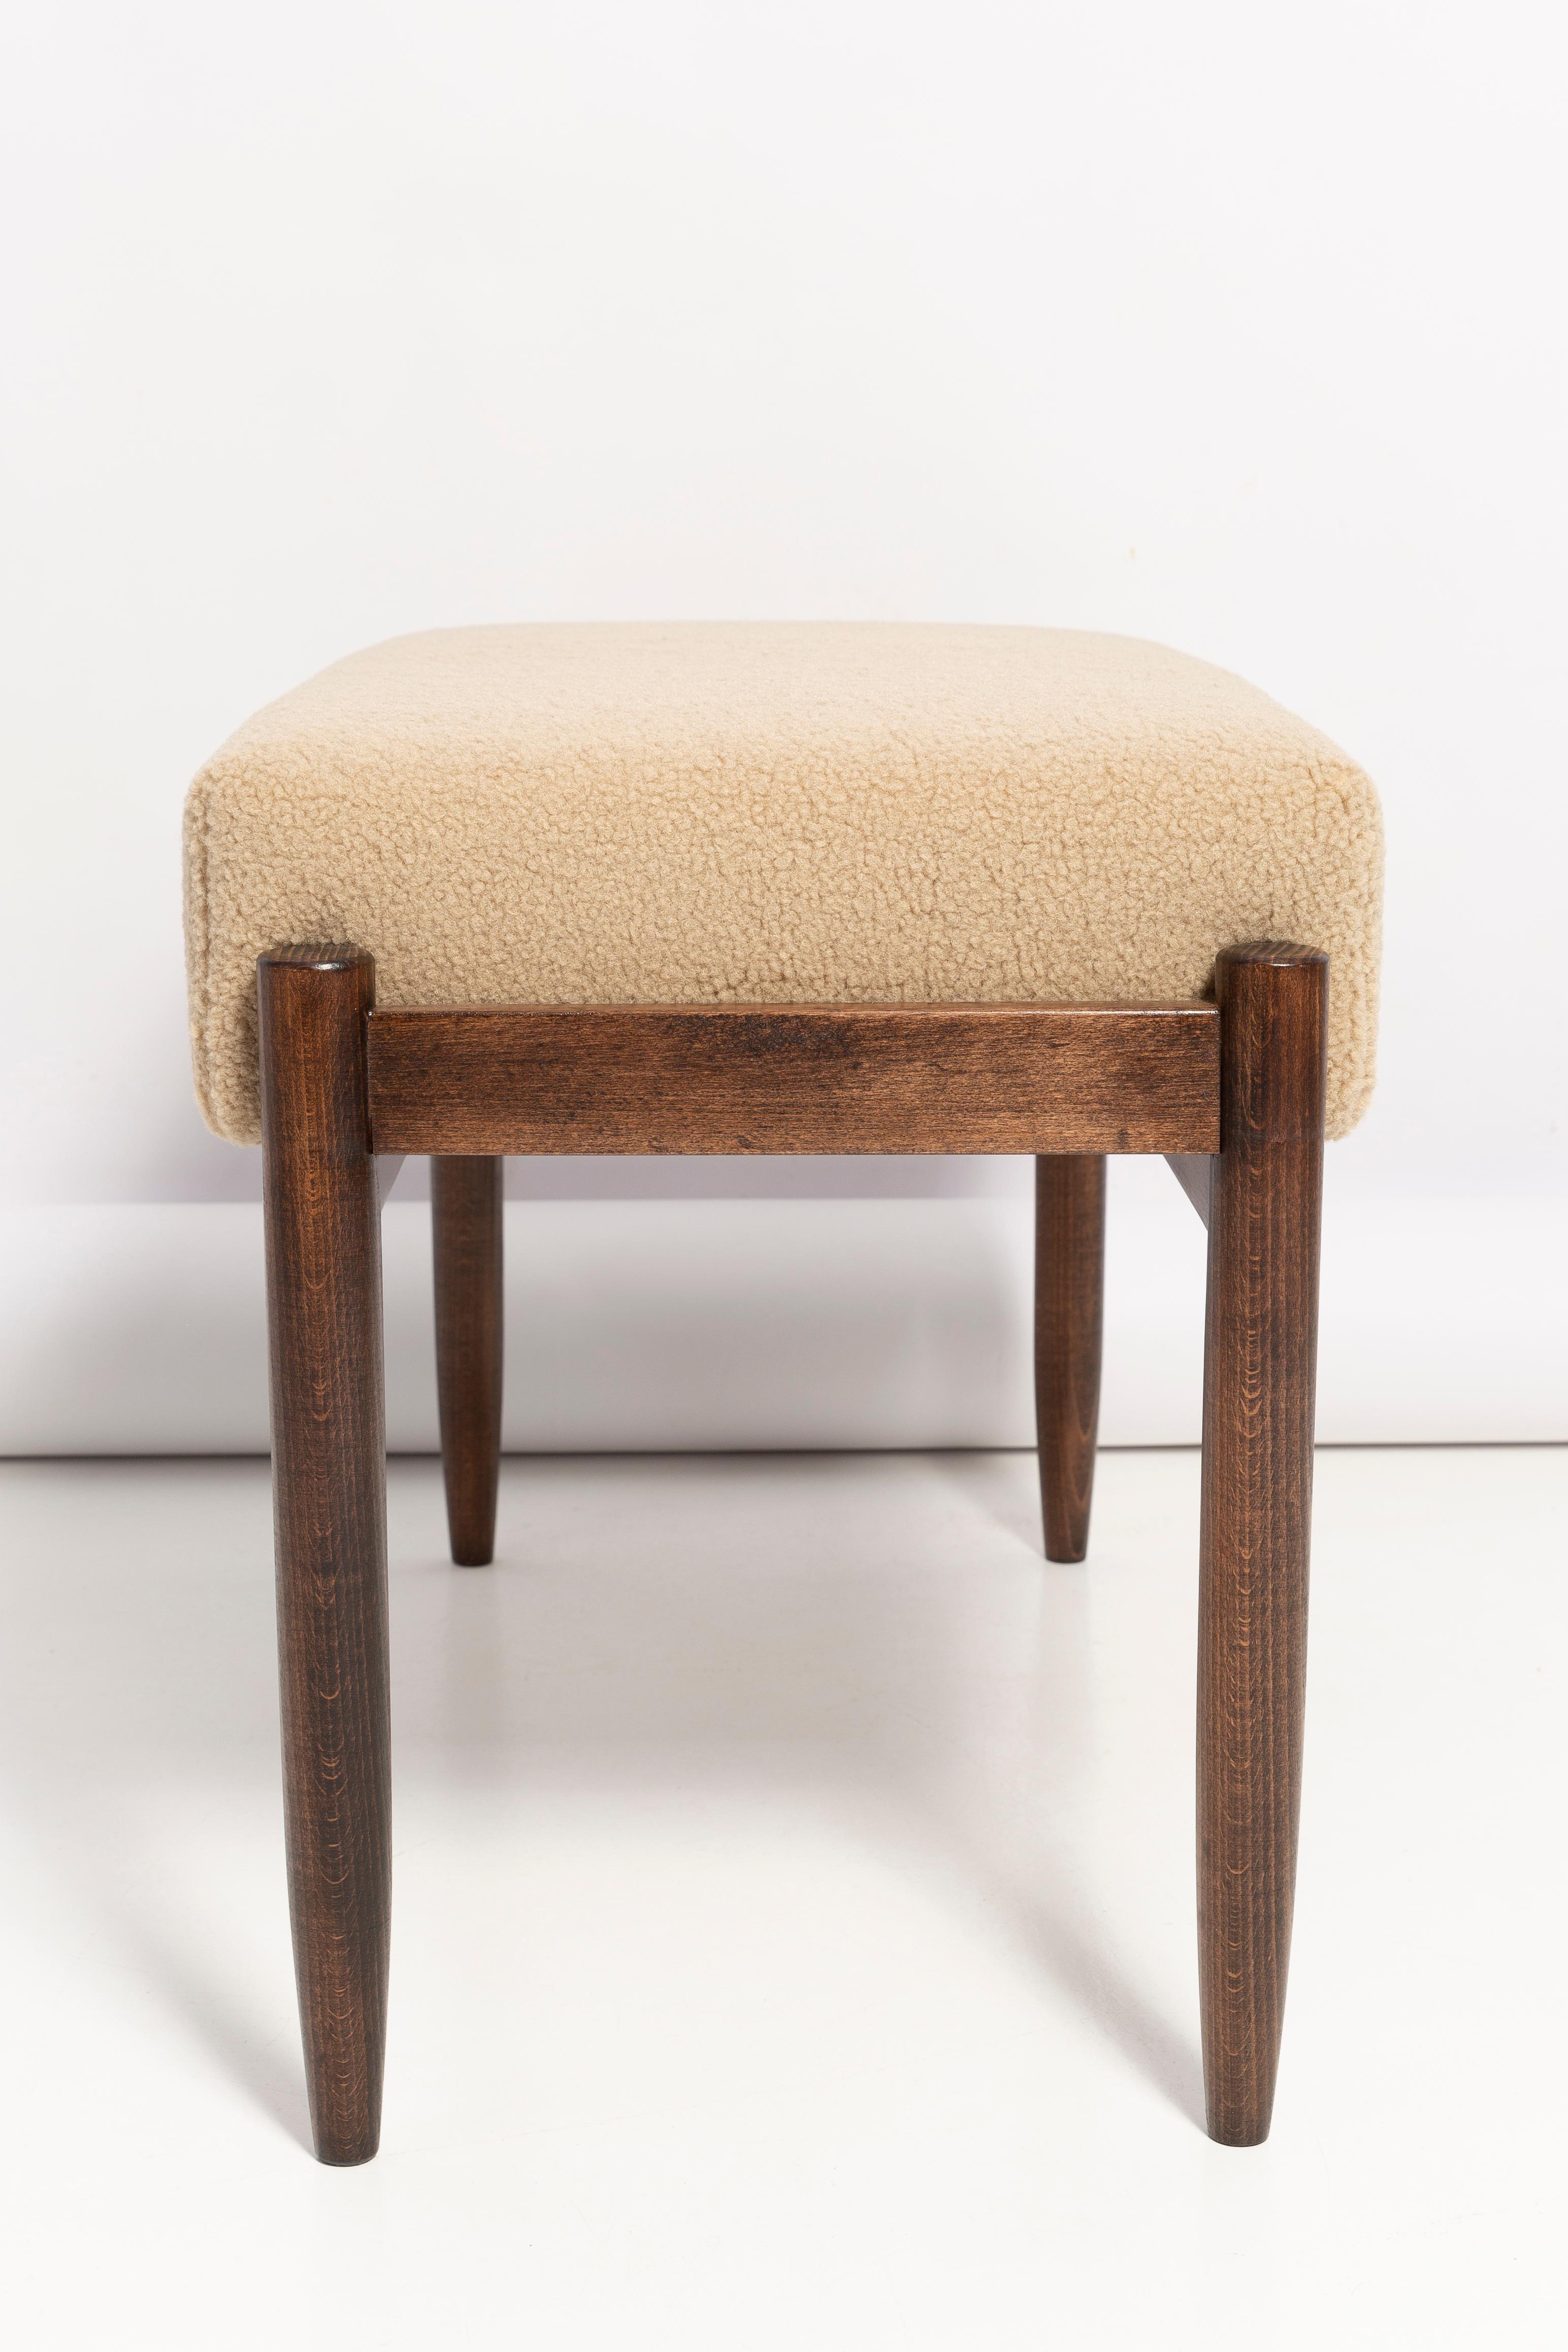 Hand-Crafted Bench in Camel Boucle by Vintola Studio, Europe, Poland For Sale